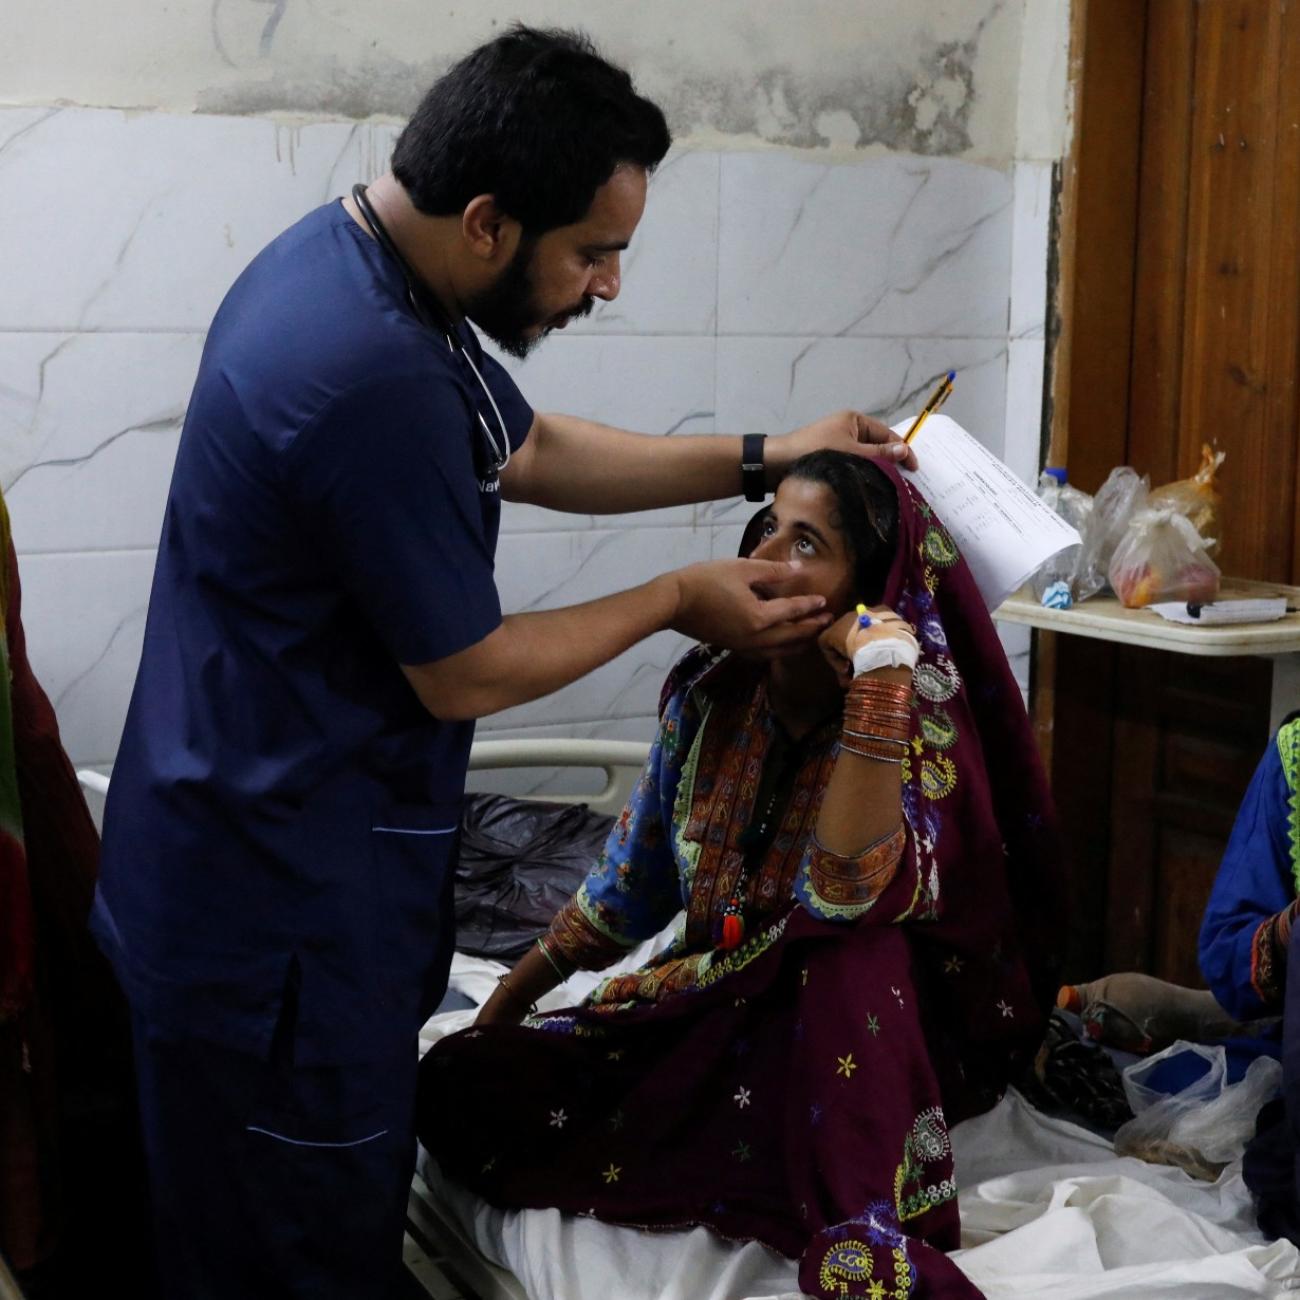 Naveed Ahmed, a doctor, gives medical assistance to Hameeda, who is suffering from malaria, at Sayed Abdullah Shah Institute of Medical Sciences in Sehwan, Pakistan, on September 29, 2022.